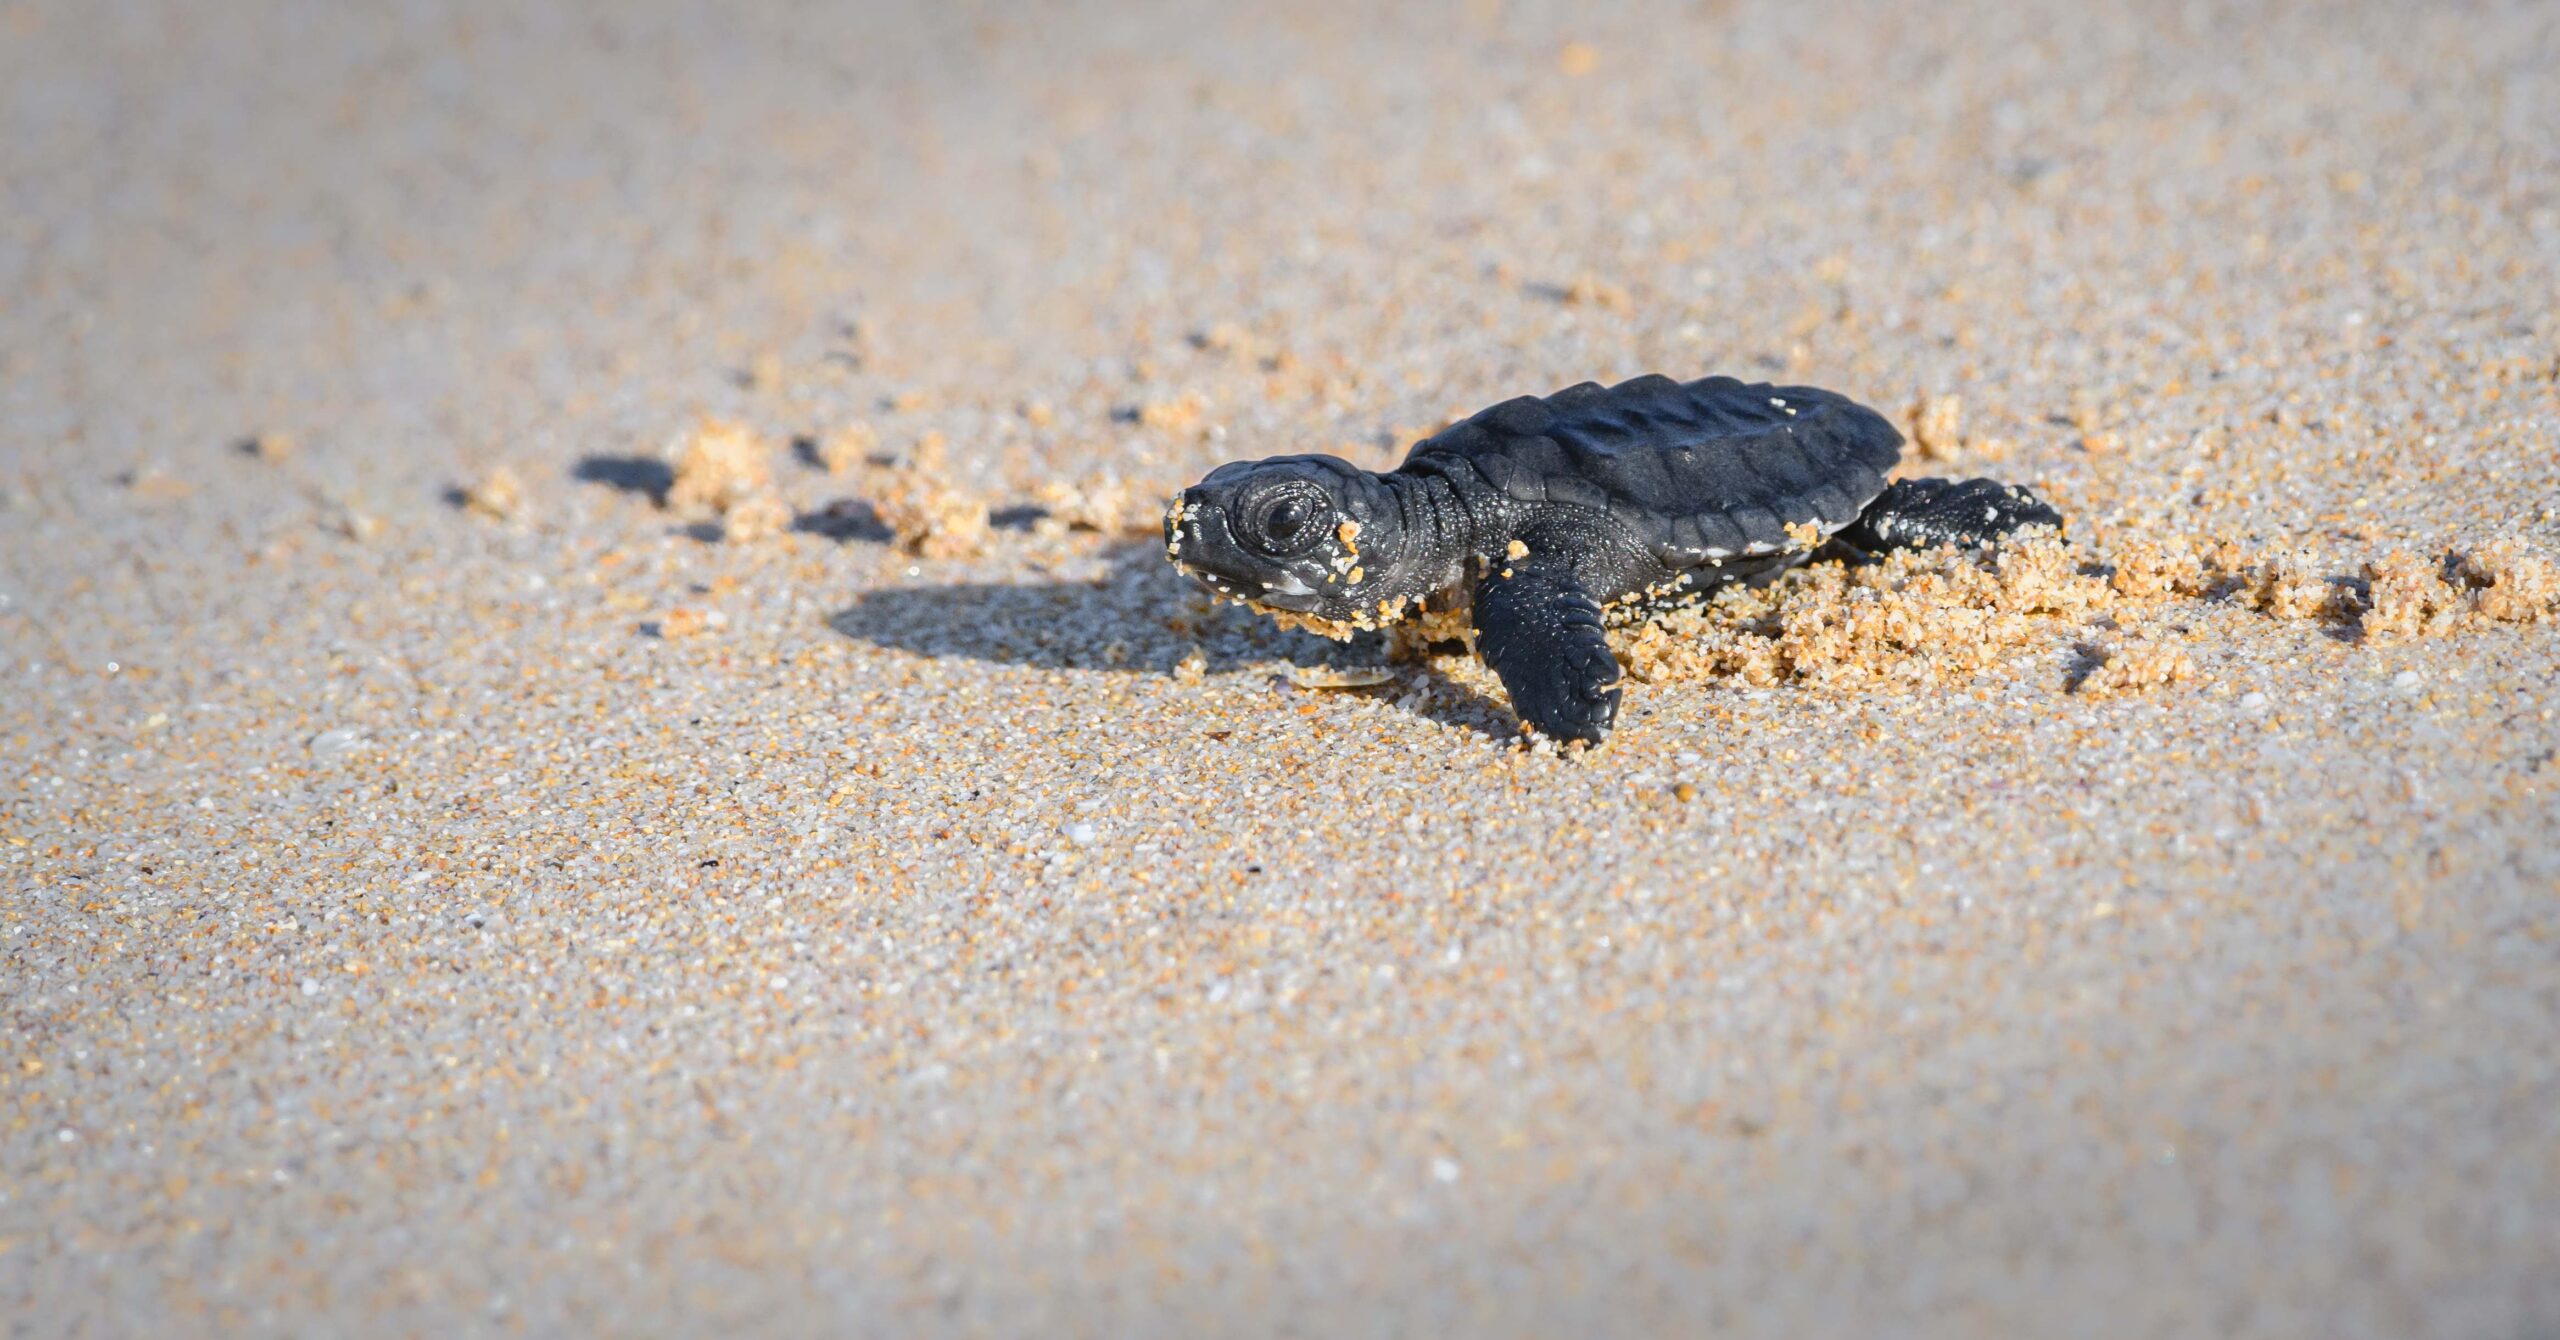 Cute baby Olive ridley sea turtle hatchling crawling towards the sea Isolated Baby turtle on the sandy beach